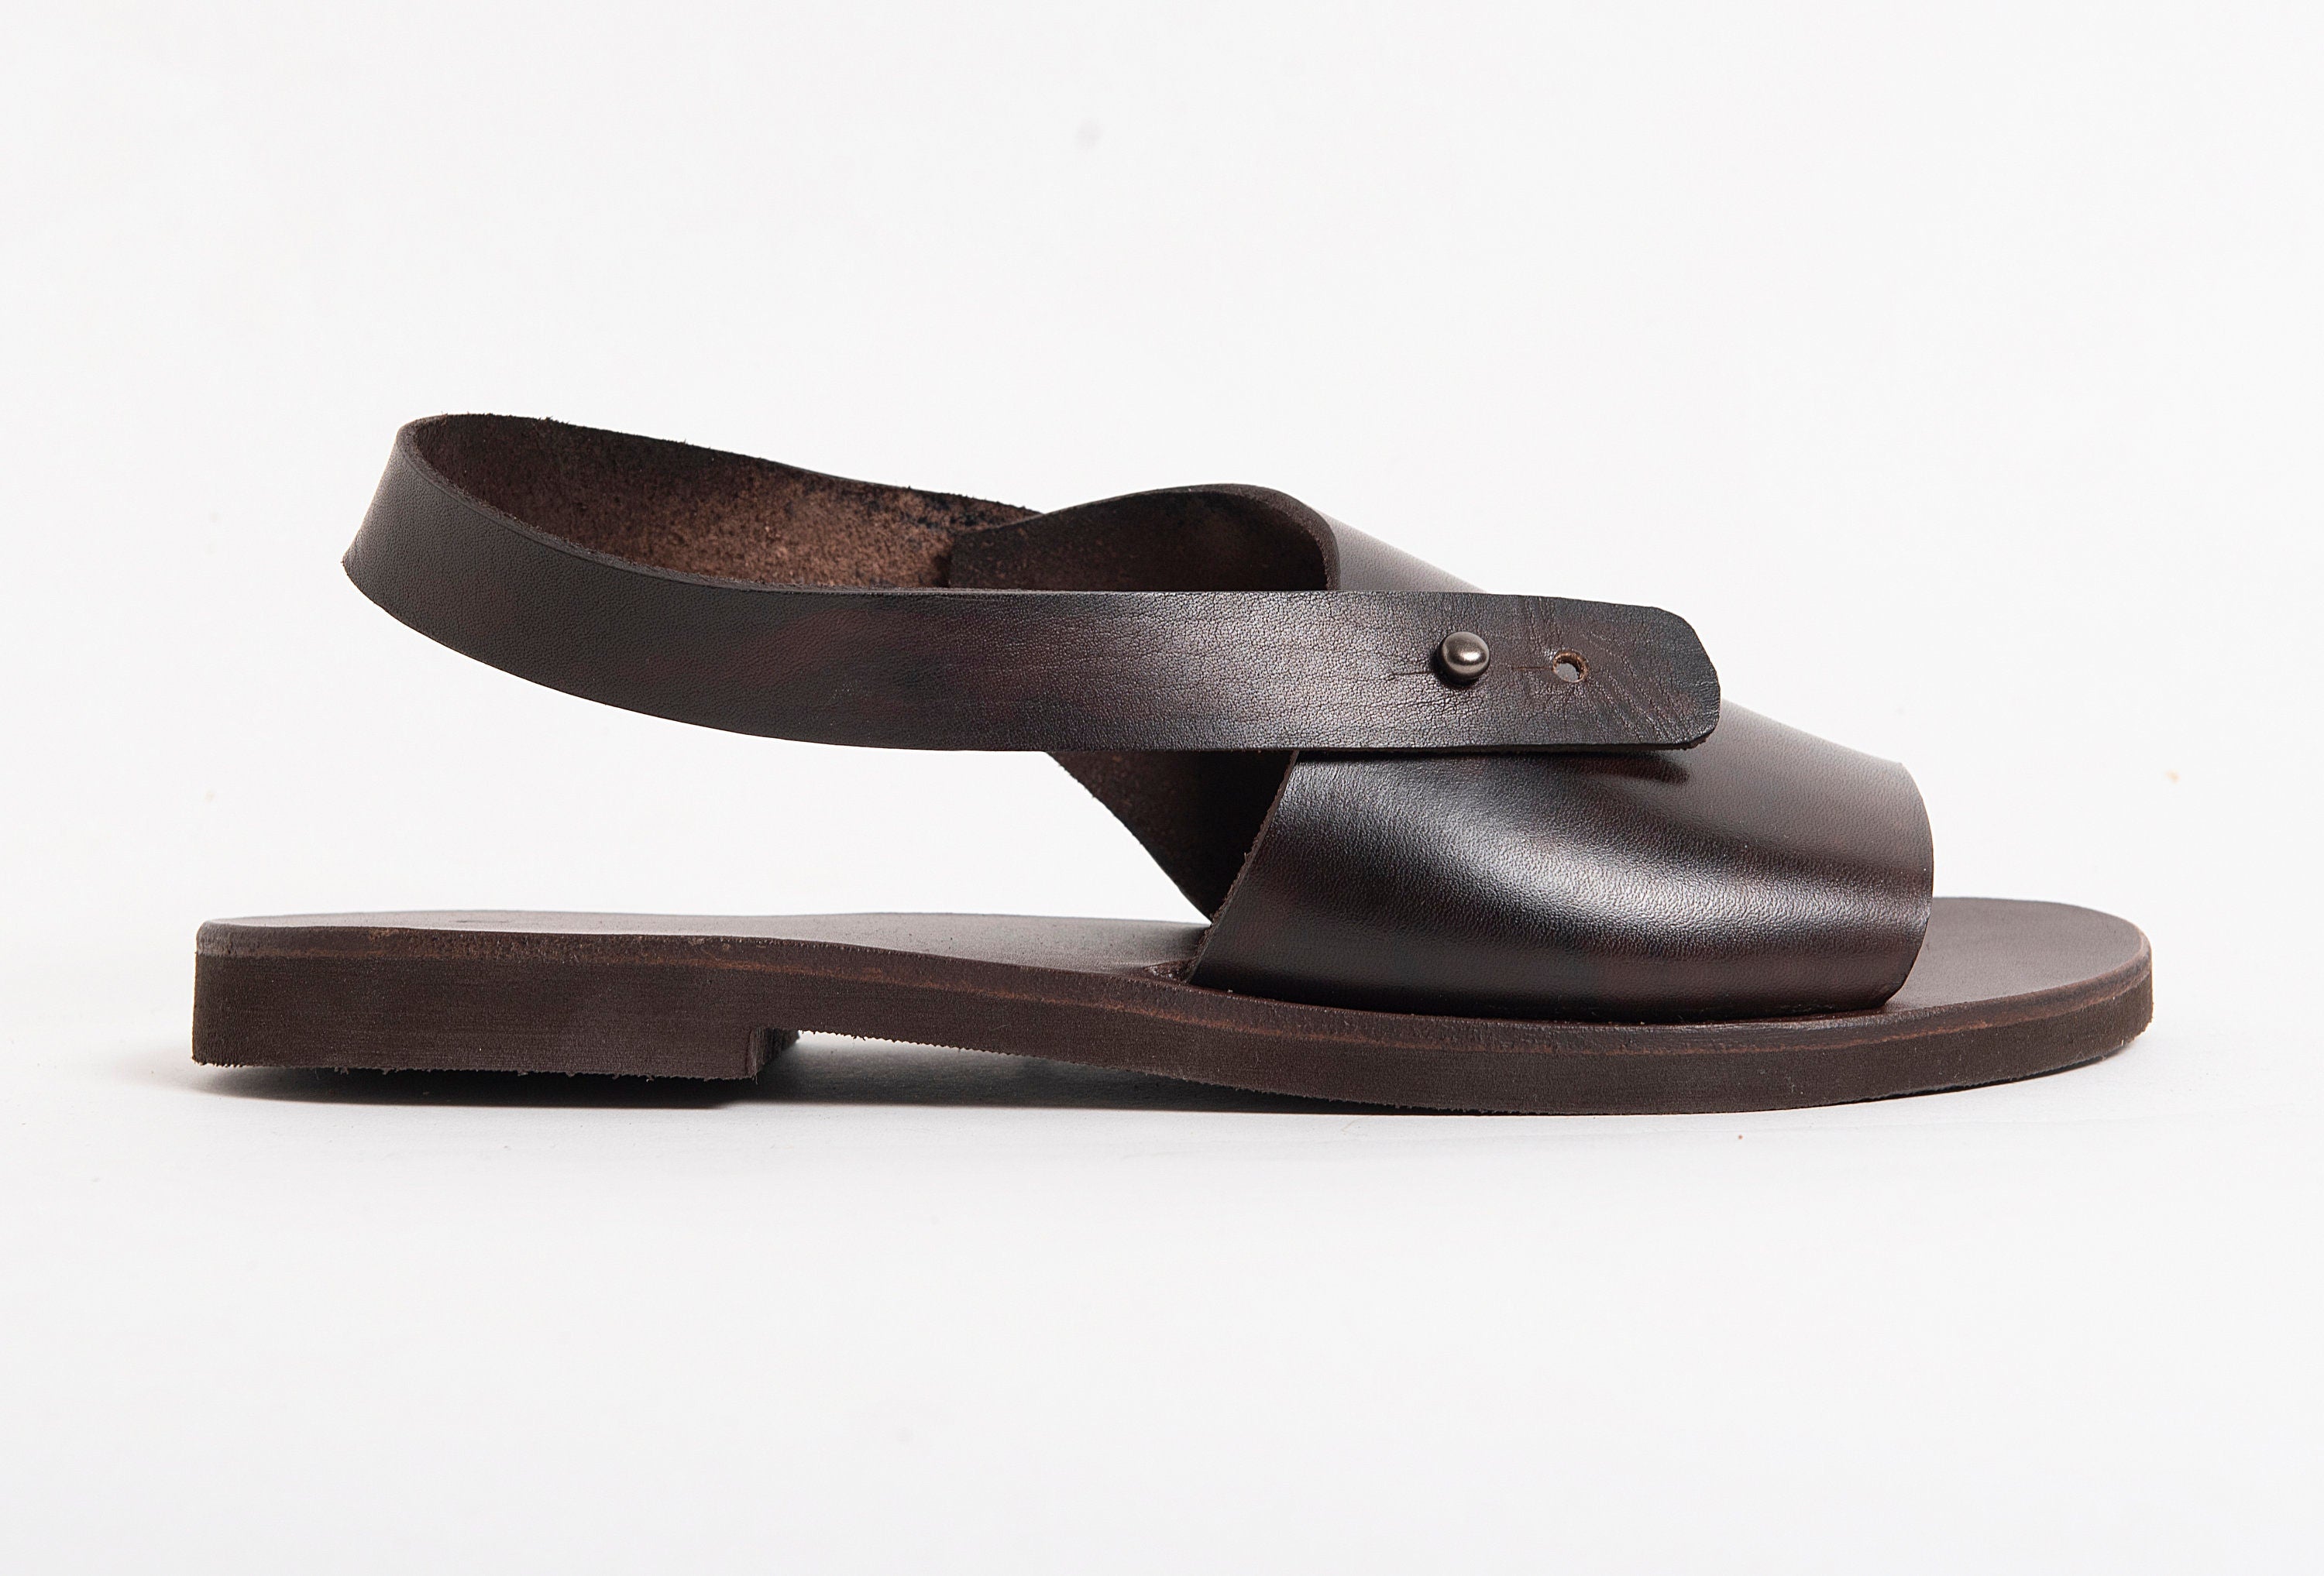 BROWN SUMMER SHOES, sandals women leather "Nepheli"